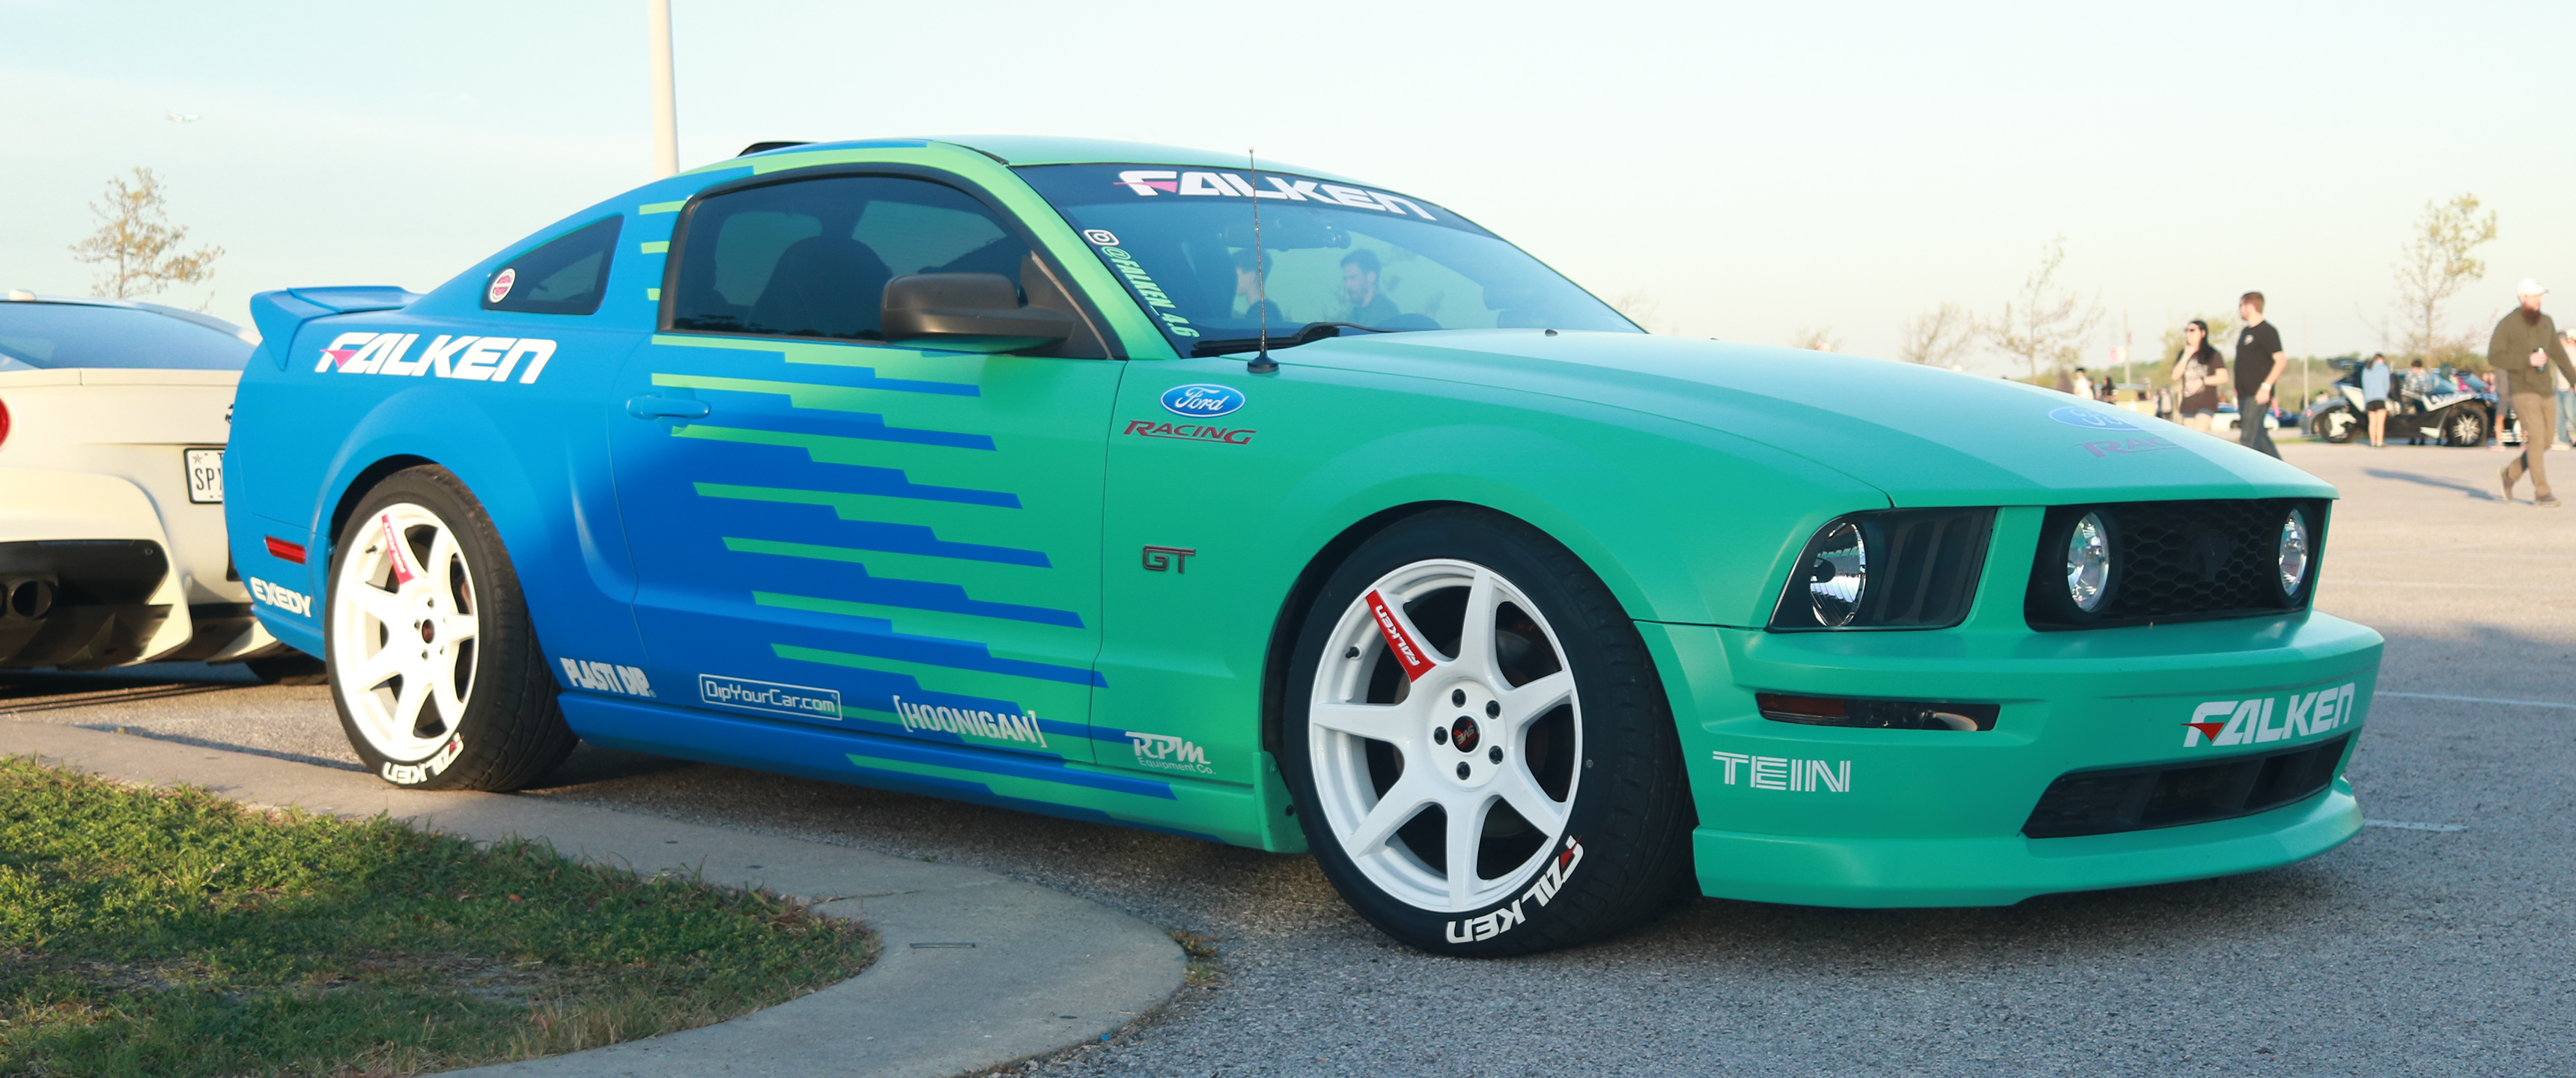 General 3440x1440 car stance (cars) Ford Mustang side view Ford livery muscle cars American cars Falken